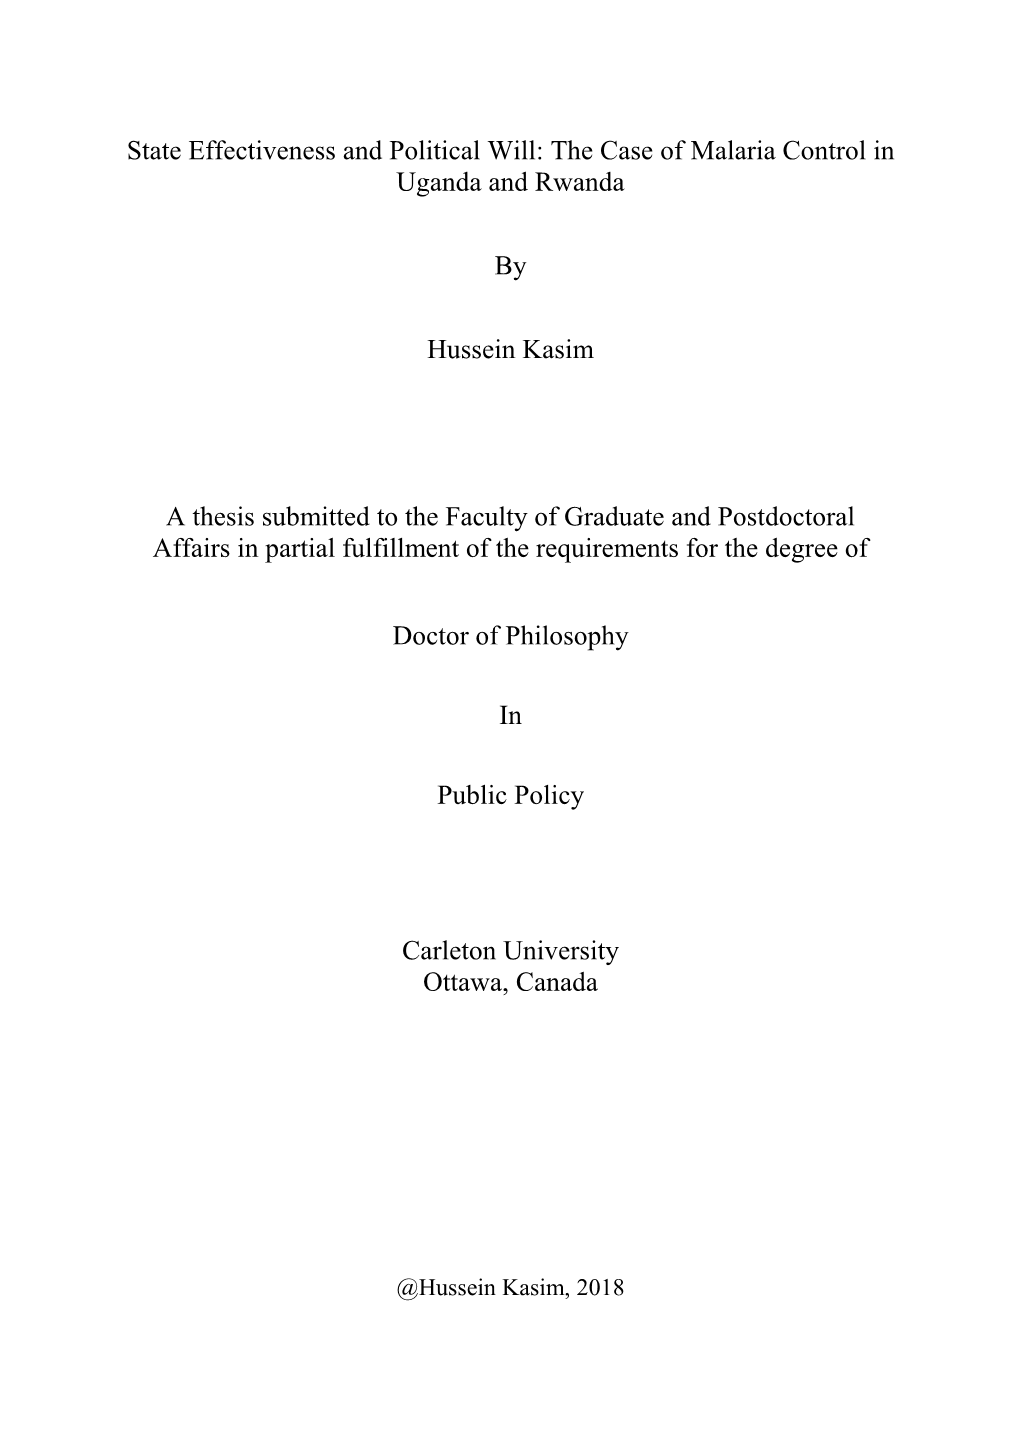 State Effectiveness and Political Will: the Case of Malaria Control in Uganda and Rwanda by Hussein Kasim a Thesis Submitted To